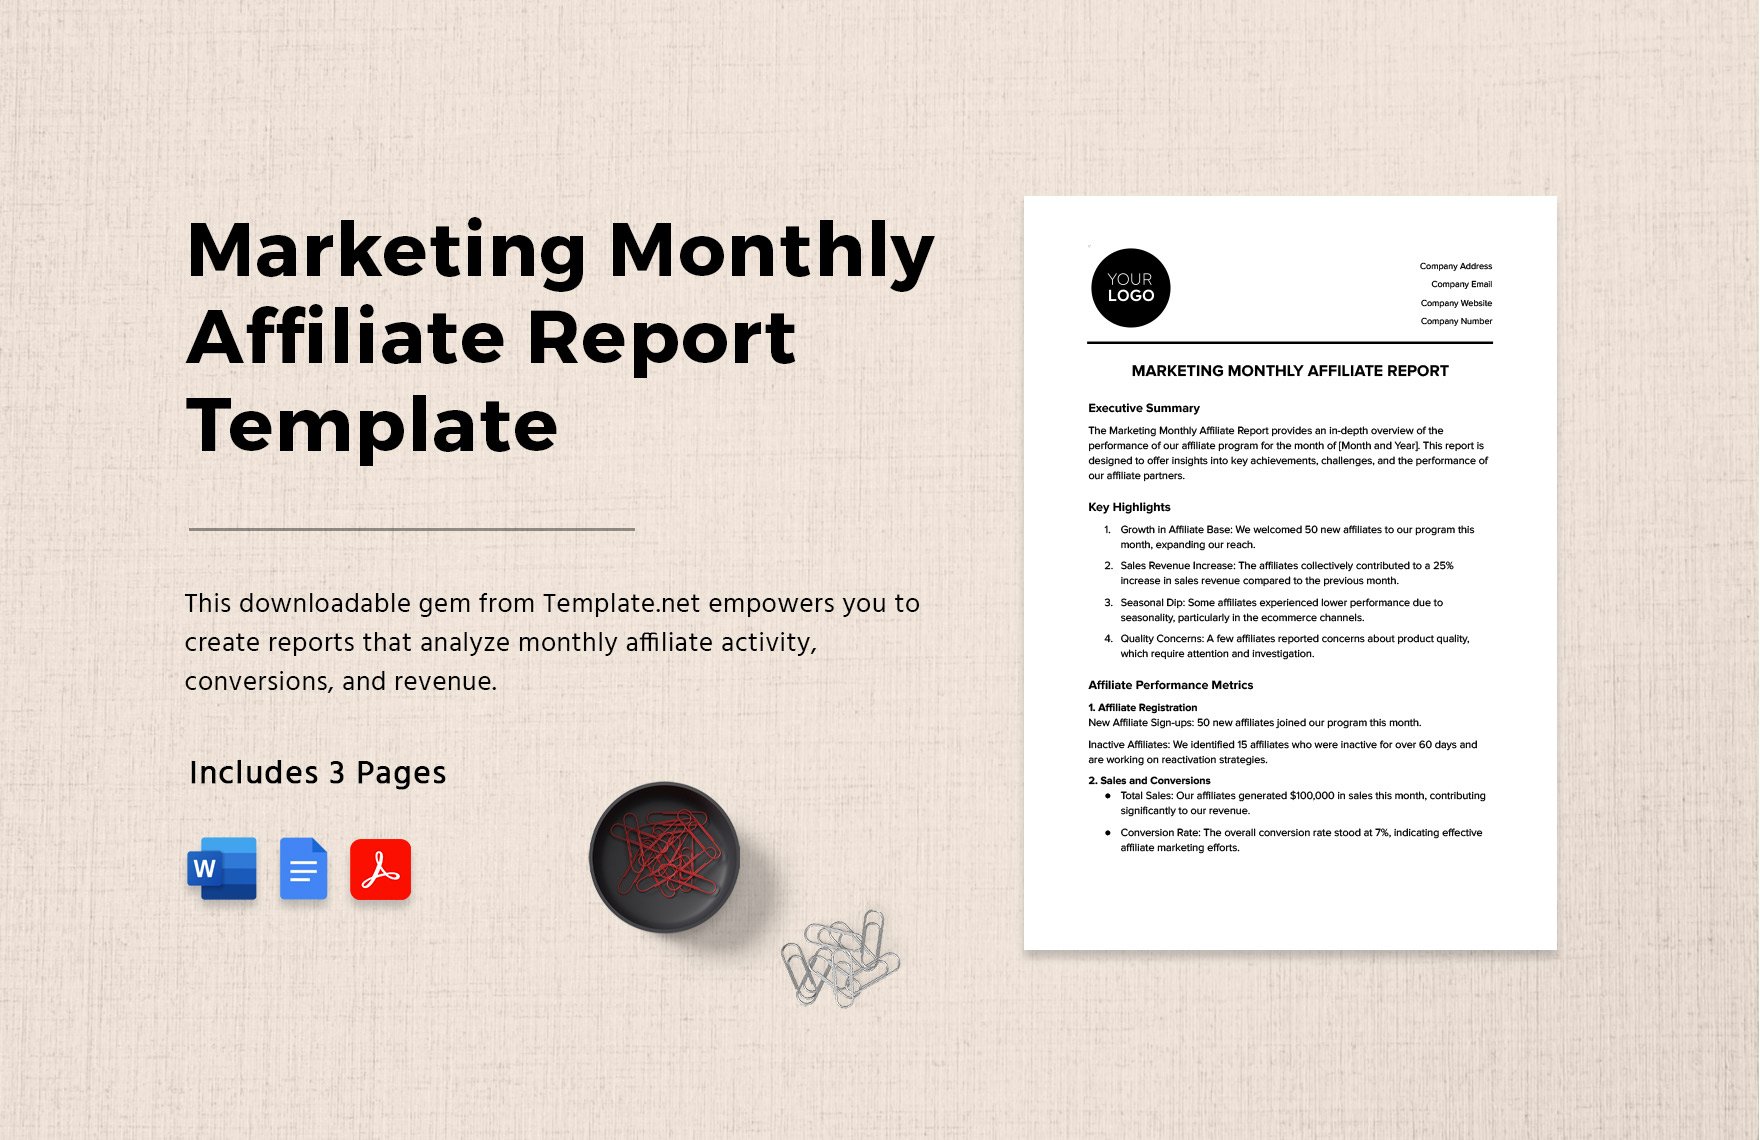 Marketing Monthly Affiliate Report Template